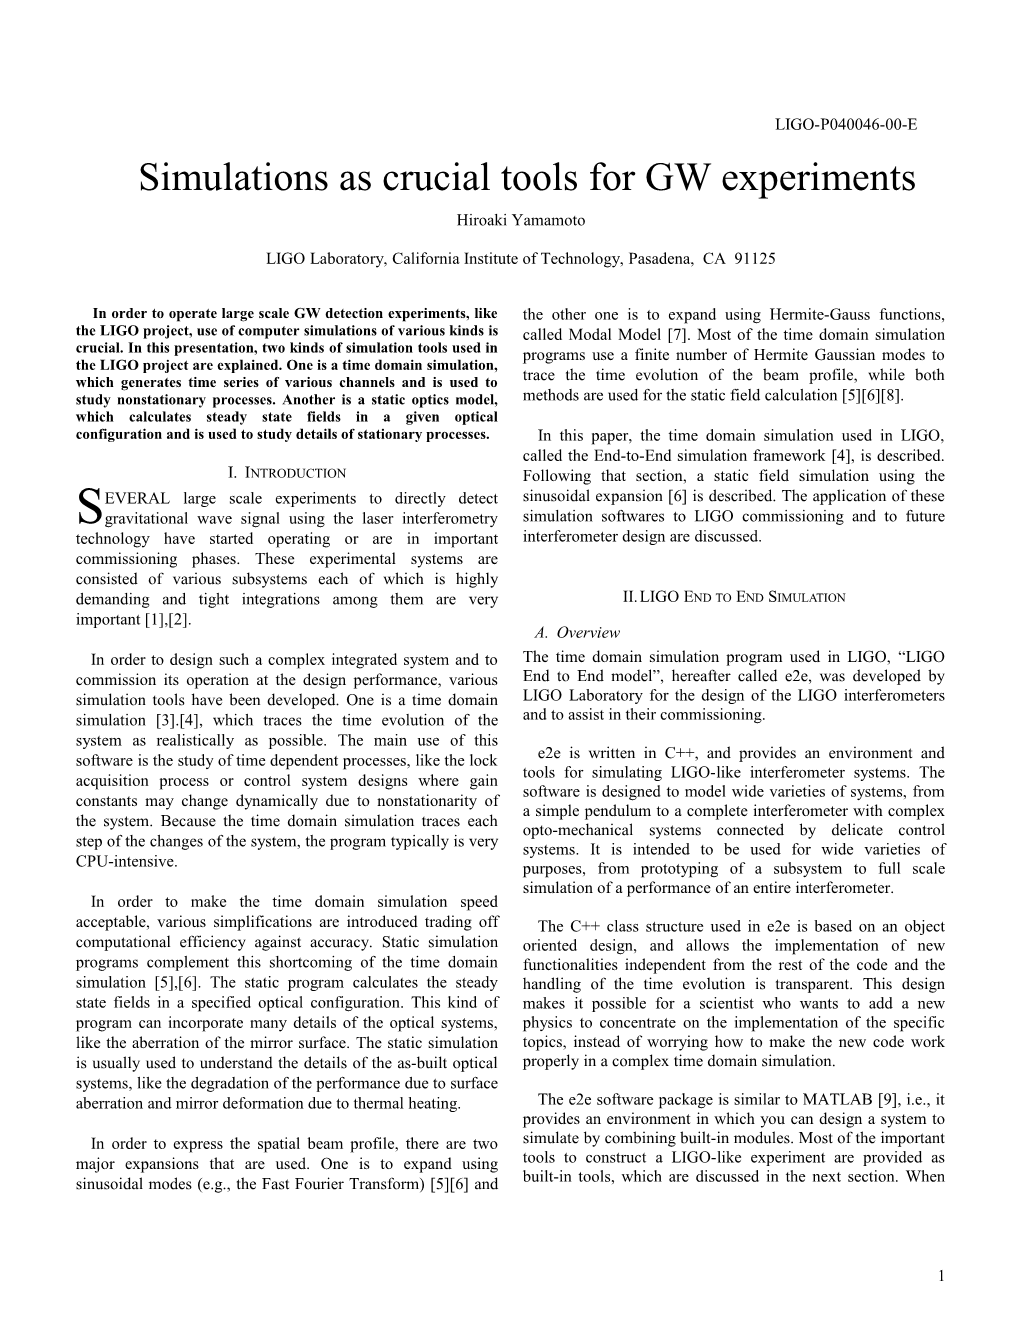 Simulations As Crucial Tools for GW Experiments